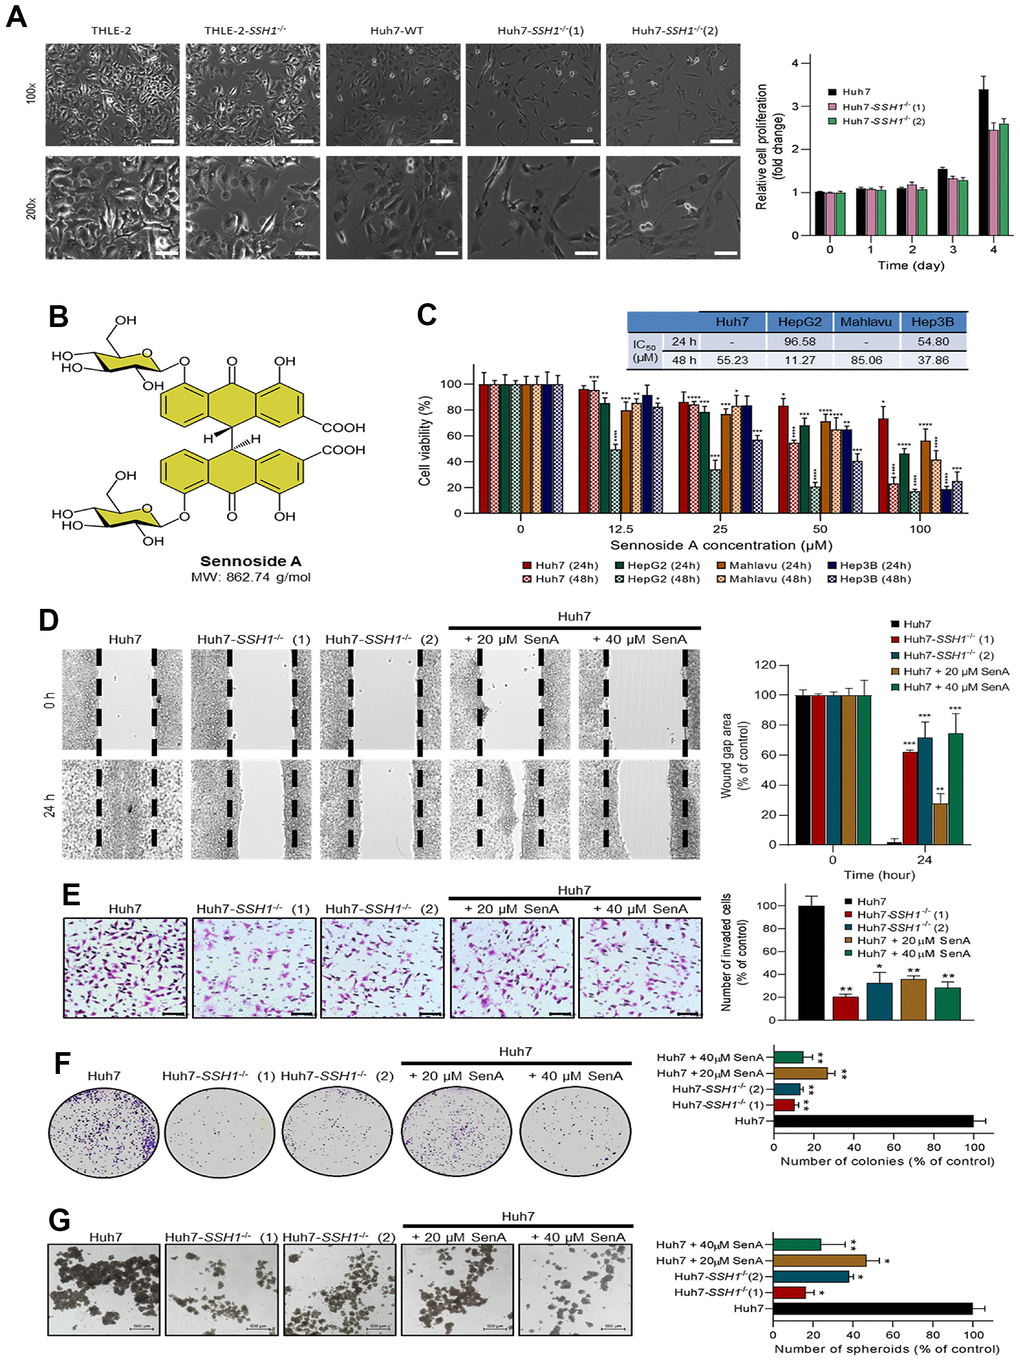 SSH1 inhibition suppresses the viability, oncogenicity, and cancer stemness of HCC cells. (A) Representative western blot images and histograms comparing cell viability in THLE-2, Huh7-WT, Huh7-SSH1-/-(1), and Huh7-SSH1-/-(2) cells at 100x and 200x magnification. (B) Molecular structure of Sennoside A with a molecular weight of 862.74 g/dl. (C) Histograms of the cell viability of Huh7, HepG2, Mahlavu, or Hep3B cells treated with 0 - 100 μM Sennoside A for 24h or 48h, with IC50 indicated. (D) Representative wound-healing migration images and histograms comparing the wound-gap closure in Huh7, Huh7-SSH1-/-(1), Huh7-SSH1-/-(2), 20 μM or 40 μM SenA-treated Huh7 cells. (E) Representative invasion assay images and histograms comparing the number of invaded Huh7, Huh7-SSH1-/-(1), Huh7-SSH1-/-(2), 20 μM or 40 μM SenA-treated Huh7 cells. (F) Representative colony-formation assay images and histograms comparing the number of colonies formed by Huh7, Huh7-SSH1-/-(1), Huh7-SSH1-/-(2), 20 μM or 40 μM SenA-treated Huh7 cells. (G) Representative tumorsphere-formation assay images and histograms comparing the number of tumorspheres formed by Huh7, Huh7-SSH1-/-(1), Huh7-SSH1-/-(2), 20 μM or 40 μM SenA-treated Huh7 cells. WT, wild type; SenA, Sennoside A; *p p p 